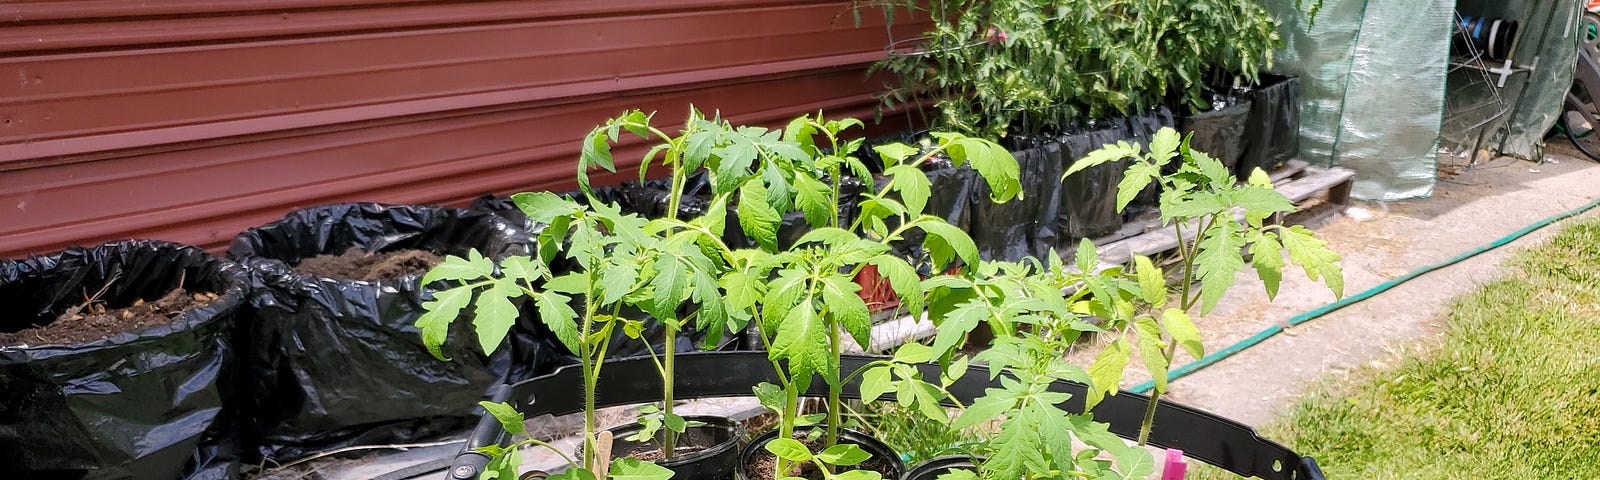 A rollator in the foreground with a tray of 7 small tomato plants on the seat with containers lined with black plastic garbage bags in the backgound against a red brown trailer skirting and on wooden pallaets. FIve of the containers have tomatoe plants and tomato cages. At the far end of the tomatoes is a small green popup greenhouse.